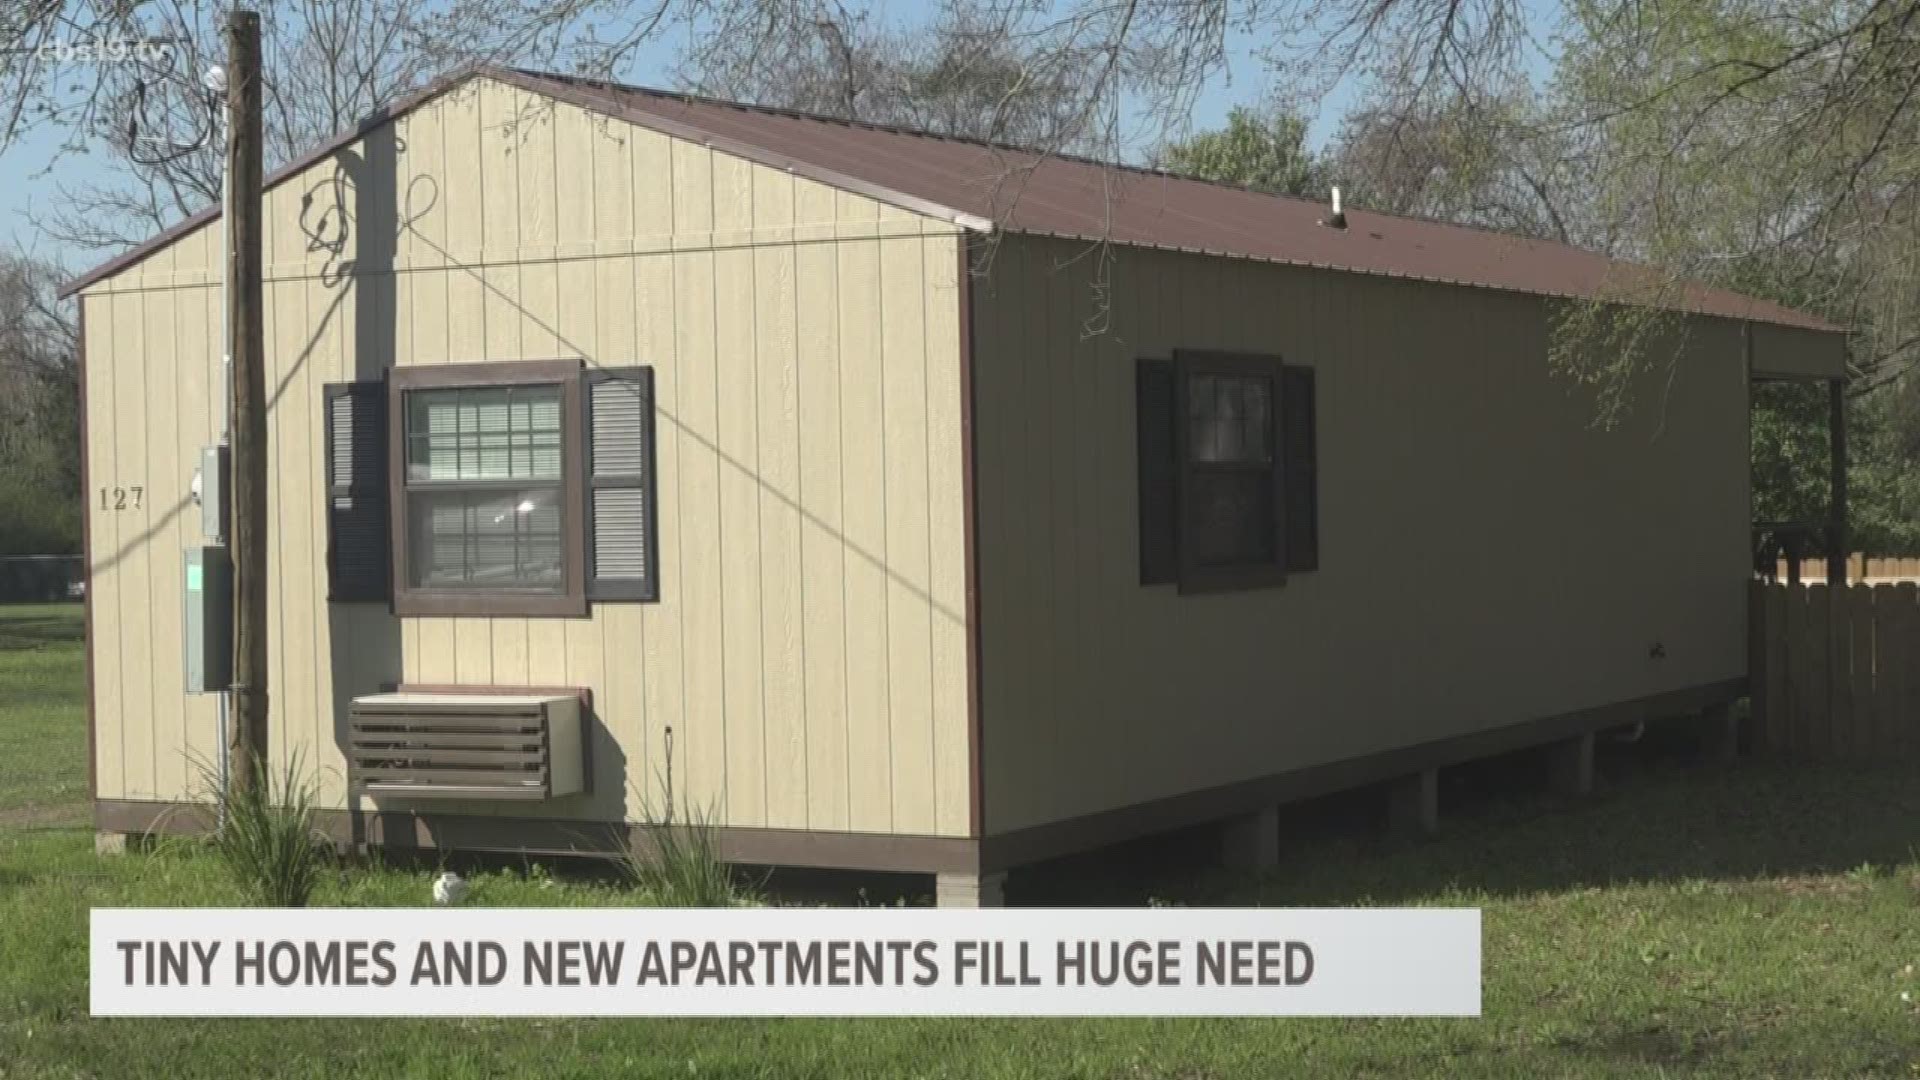 Tiny homes and new apartment complexes are hoping to help fill the need of a housing shortage in the city of Palestine.